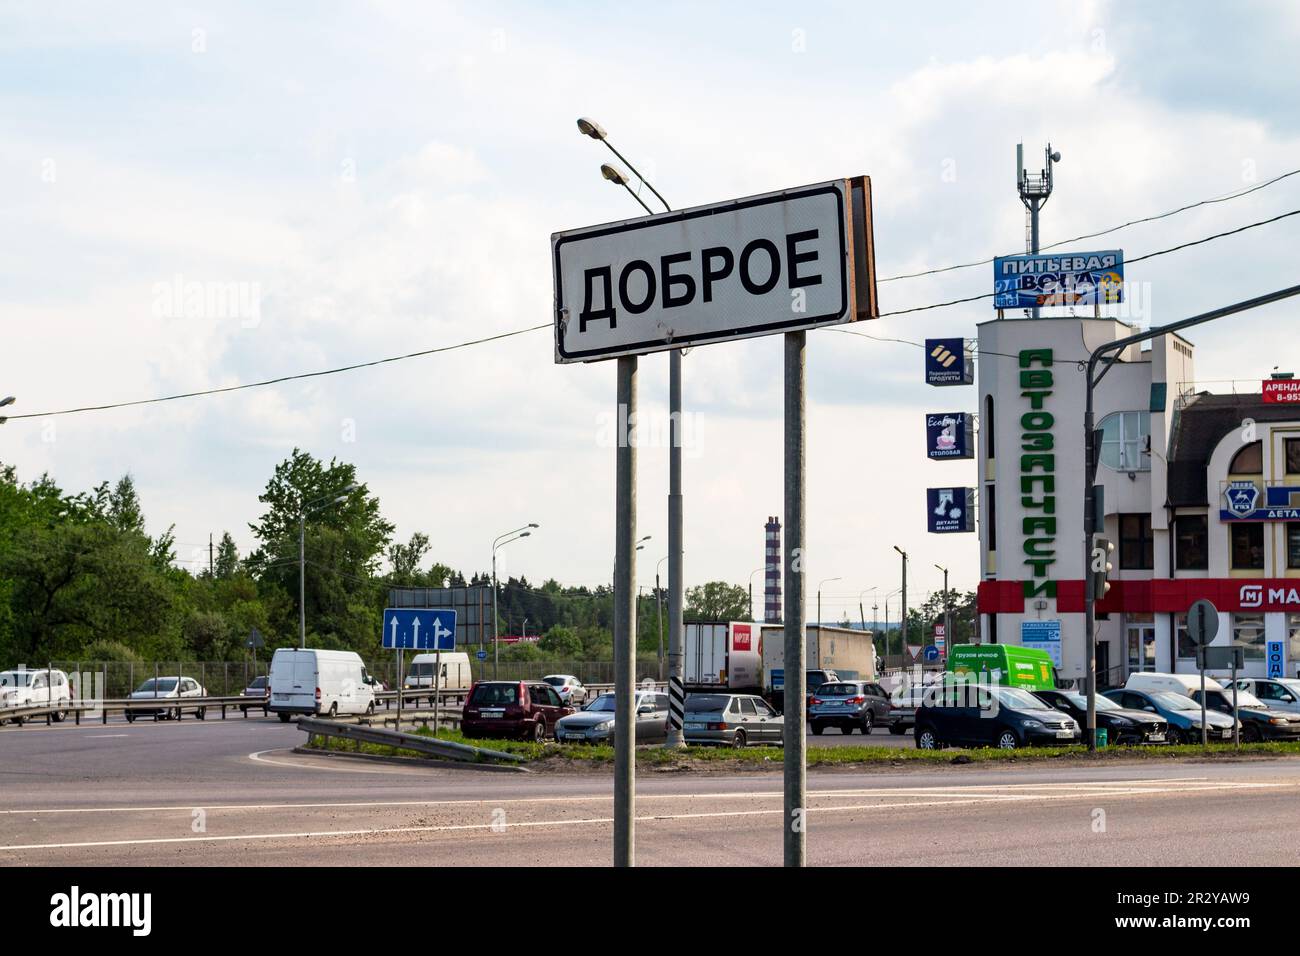 The intersection of the Kiyevskoe highway M-3 and Varshavskoe highway A130 near the village of Dobroe, Kaluga region, Russia - May 2021 Stock Photo